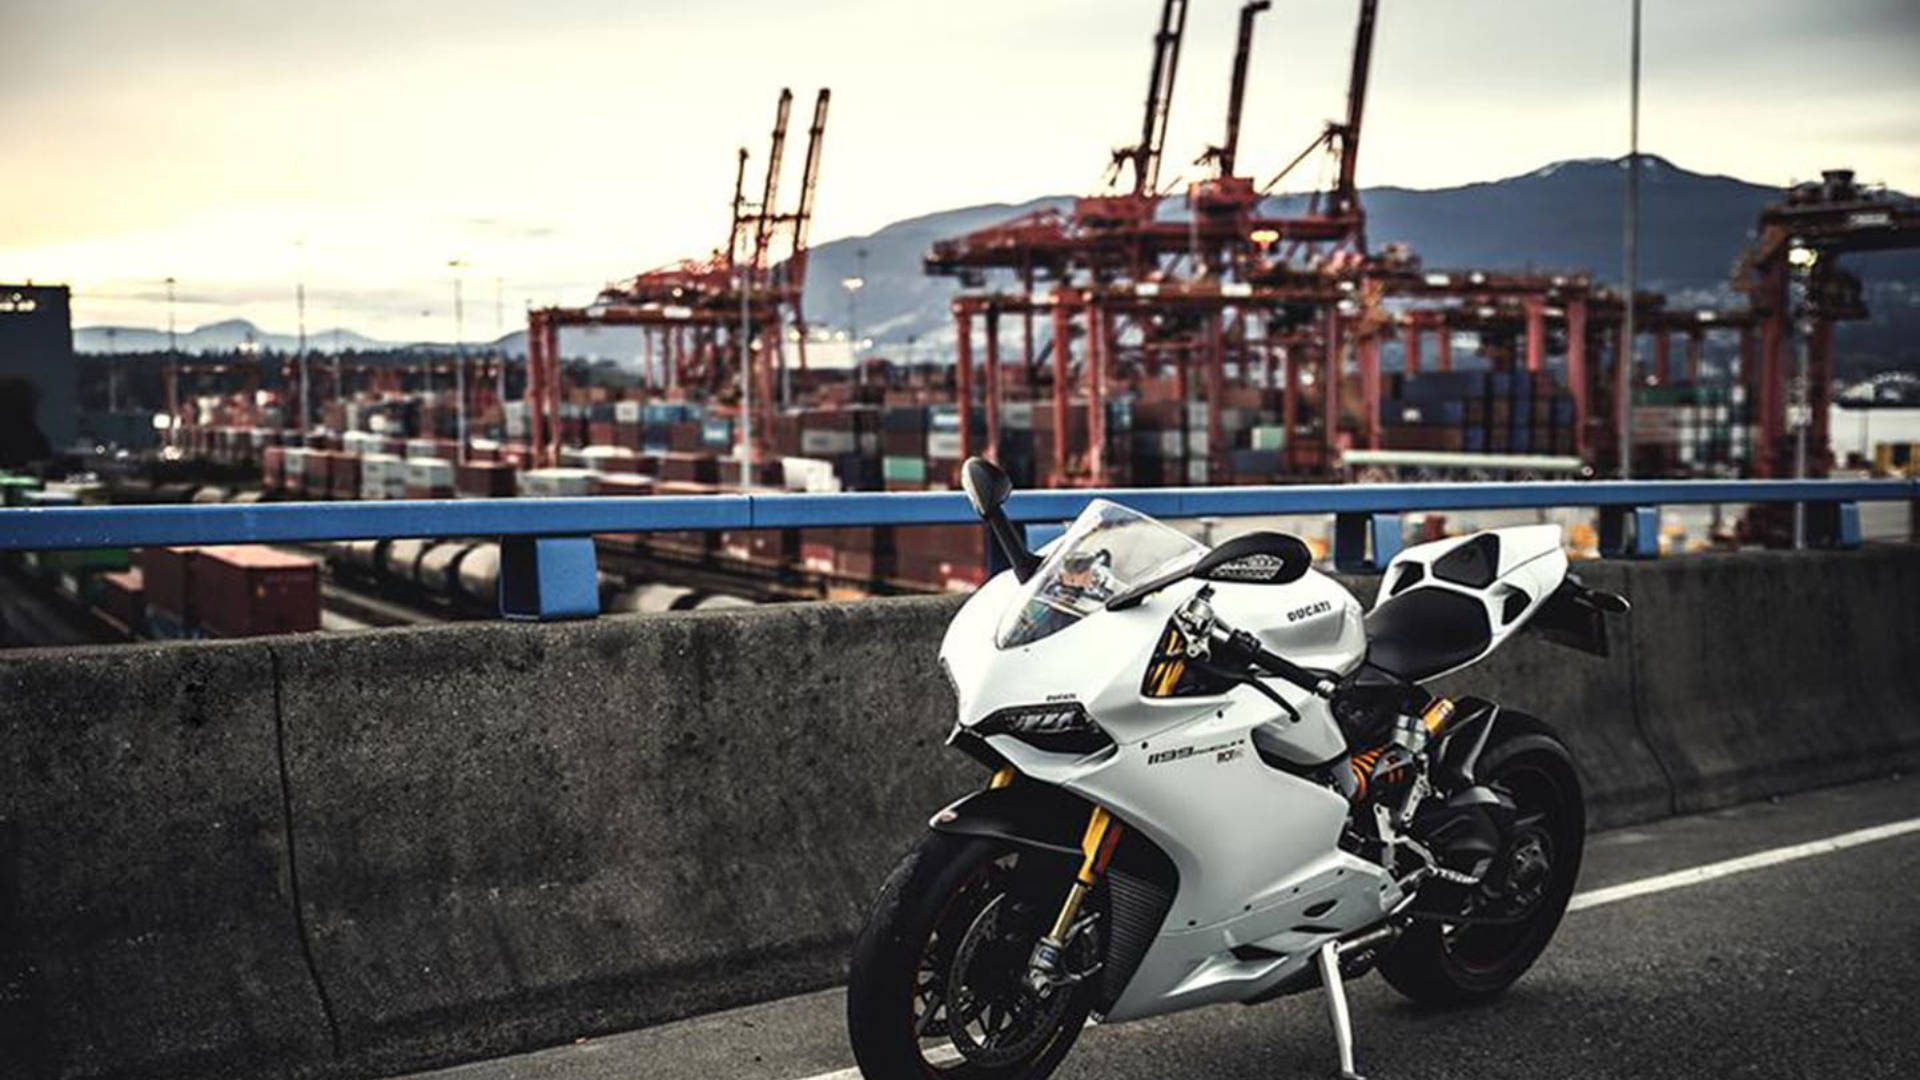 A White Ducati Motorcycle In A Container Port Background